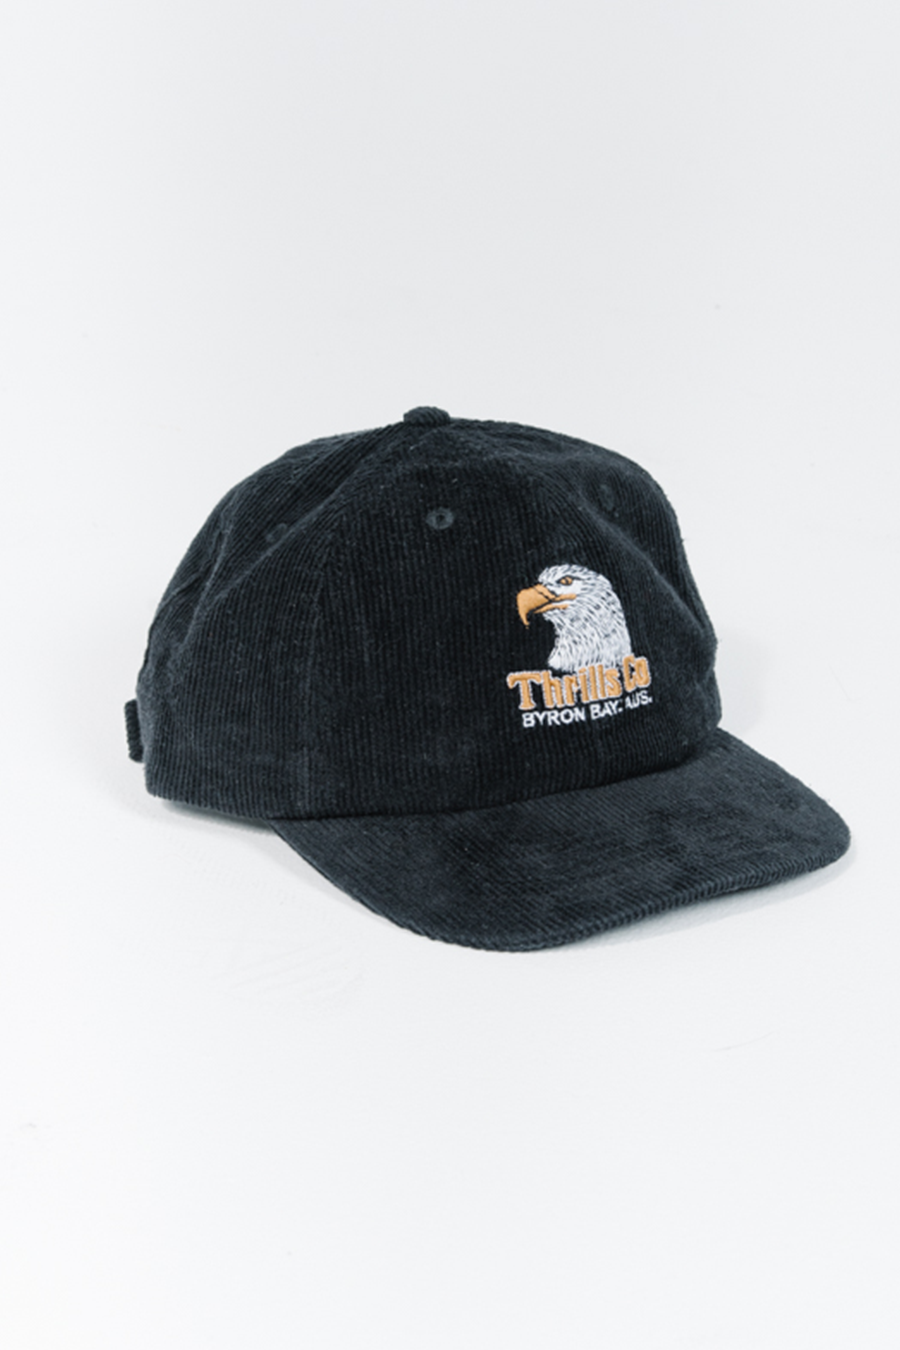 Thrills Reliance Cord Cap | Black - Main Image Number 1 of 1